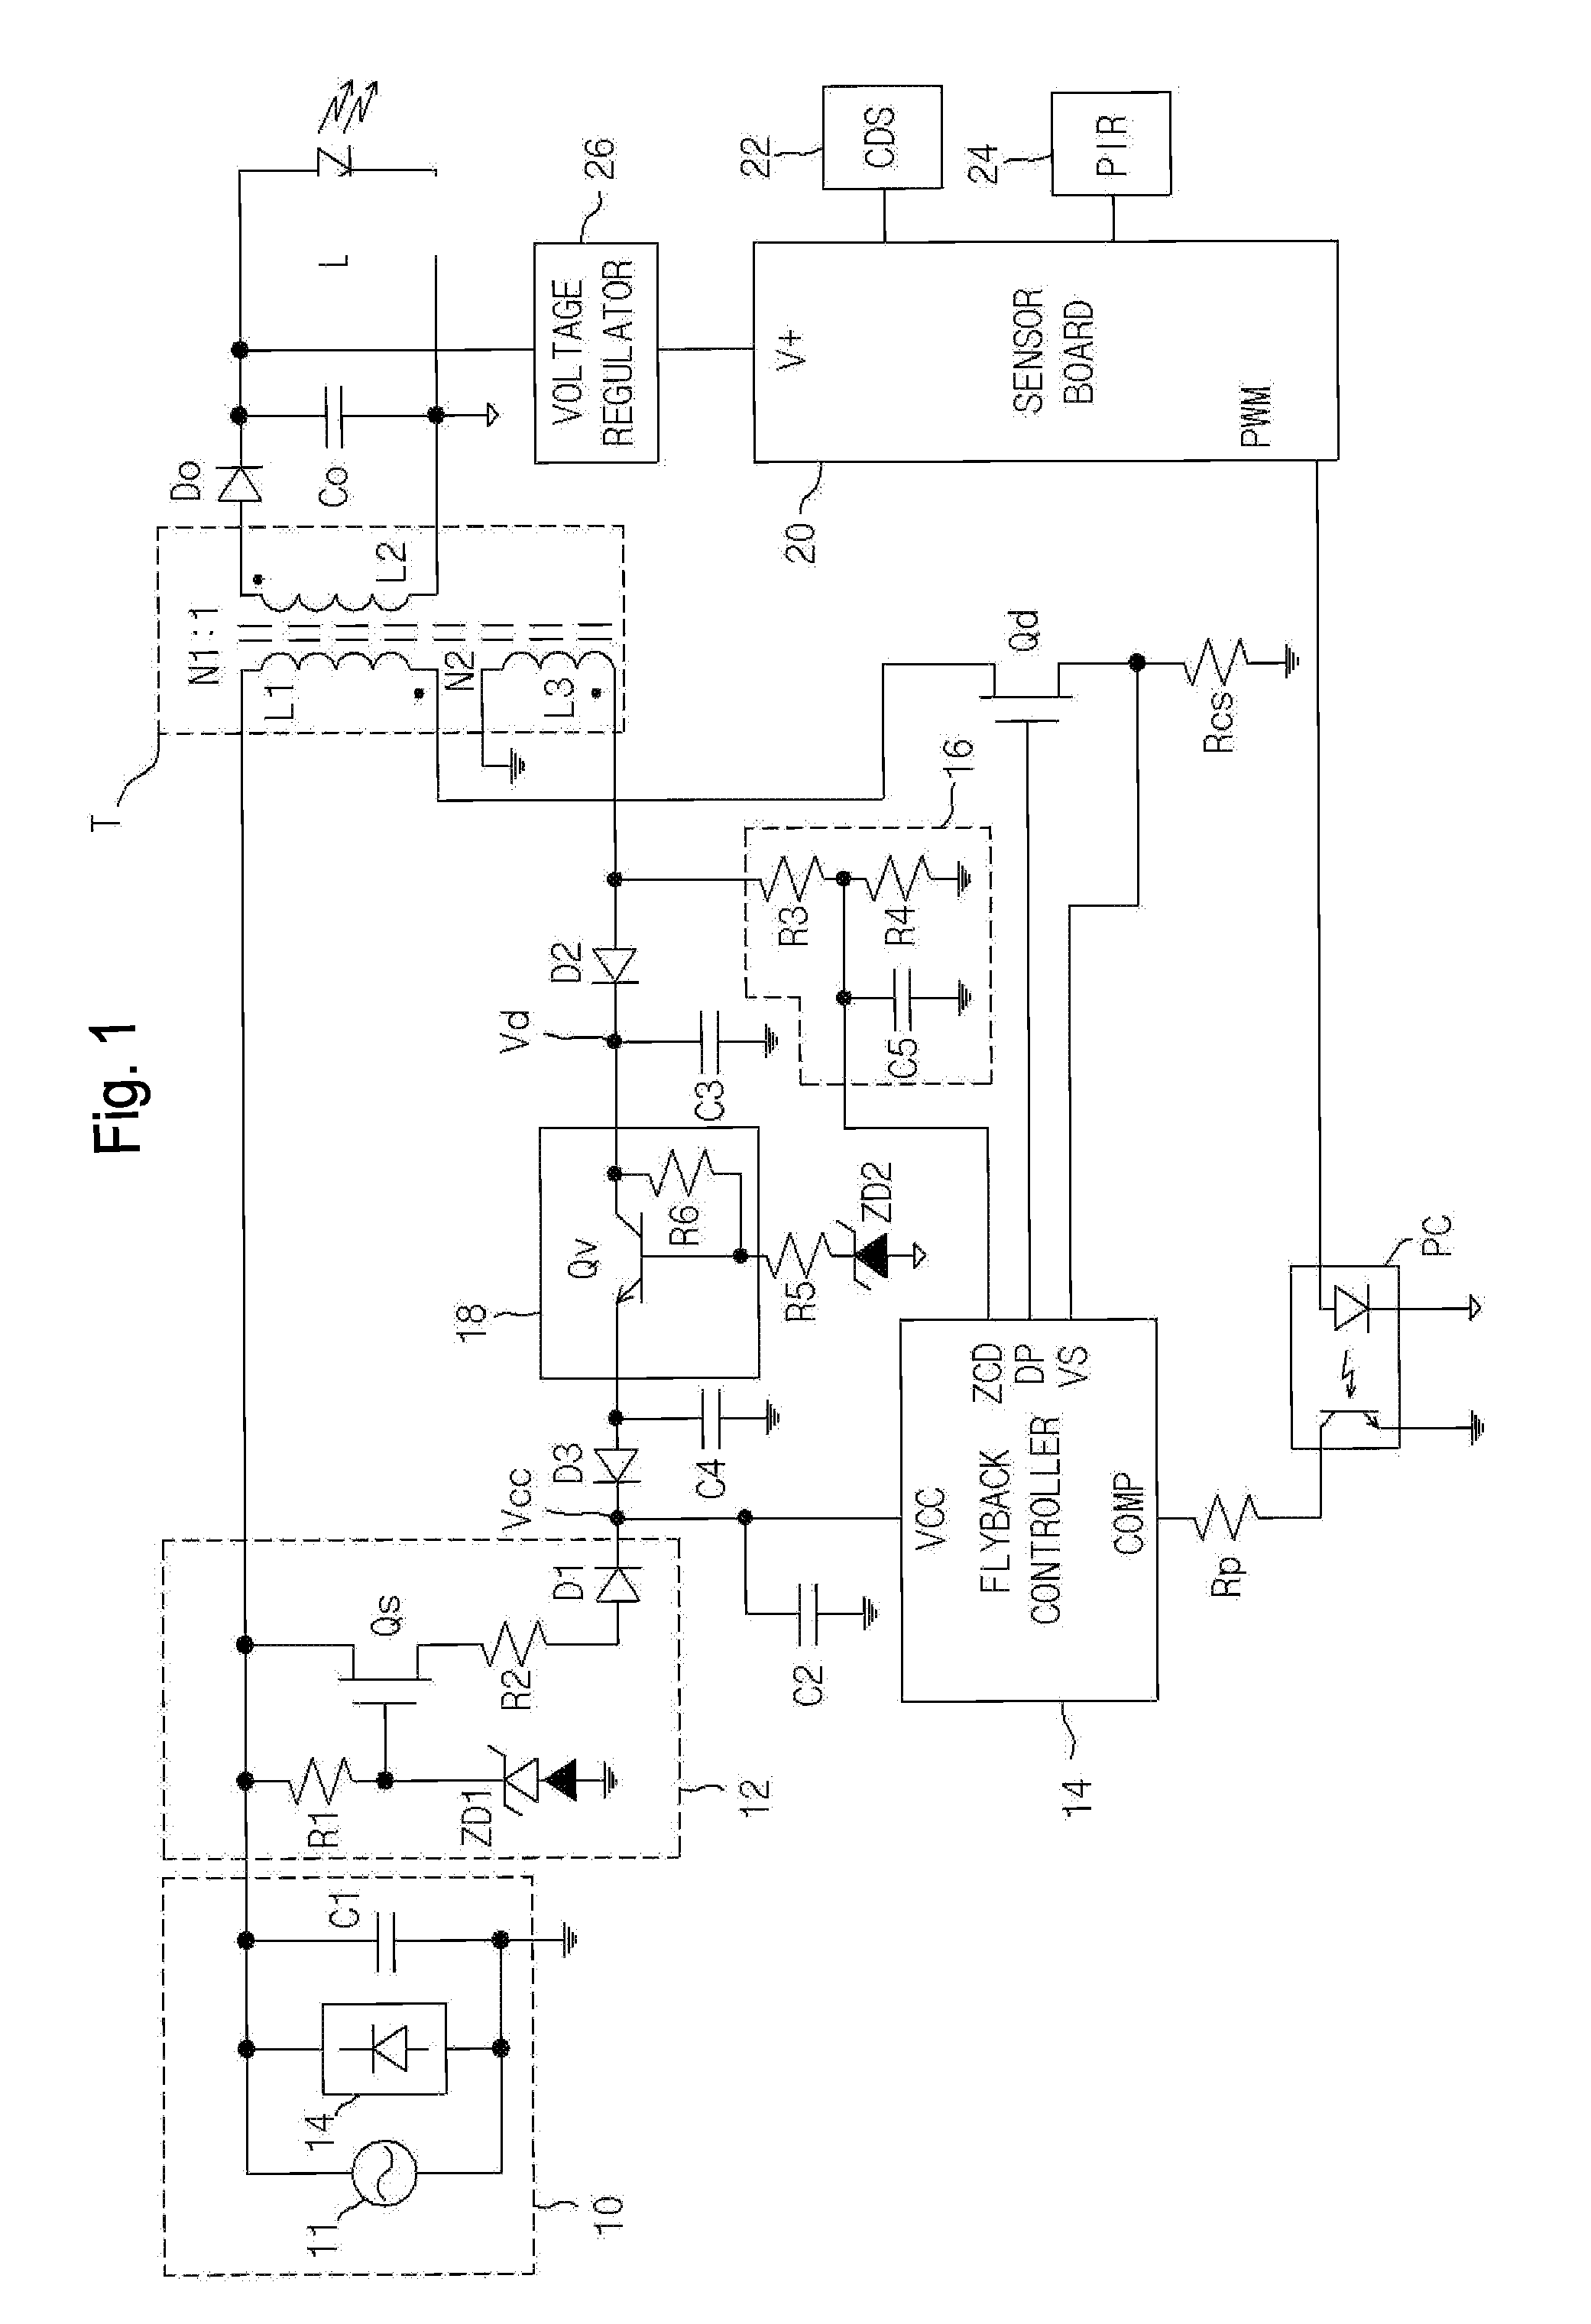 Power supply apparatus for LED lighting and LED lighting apparatus using the power supply apparatus